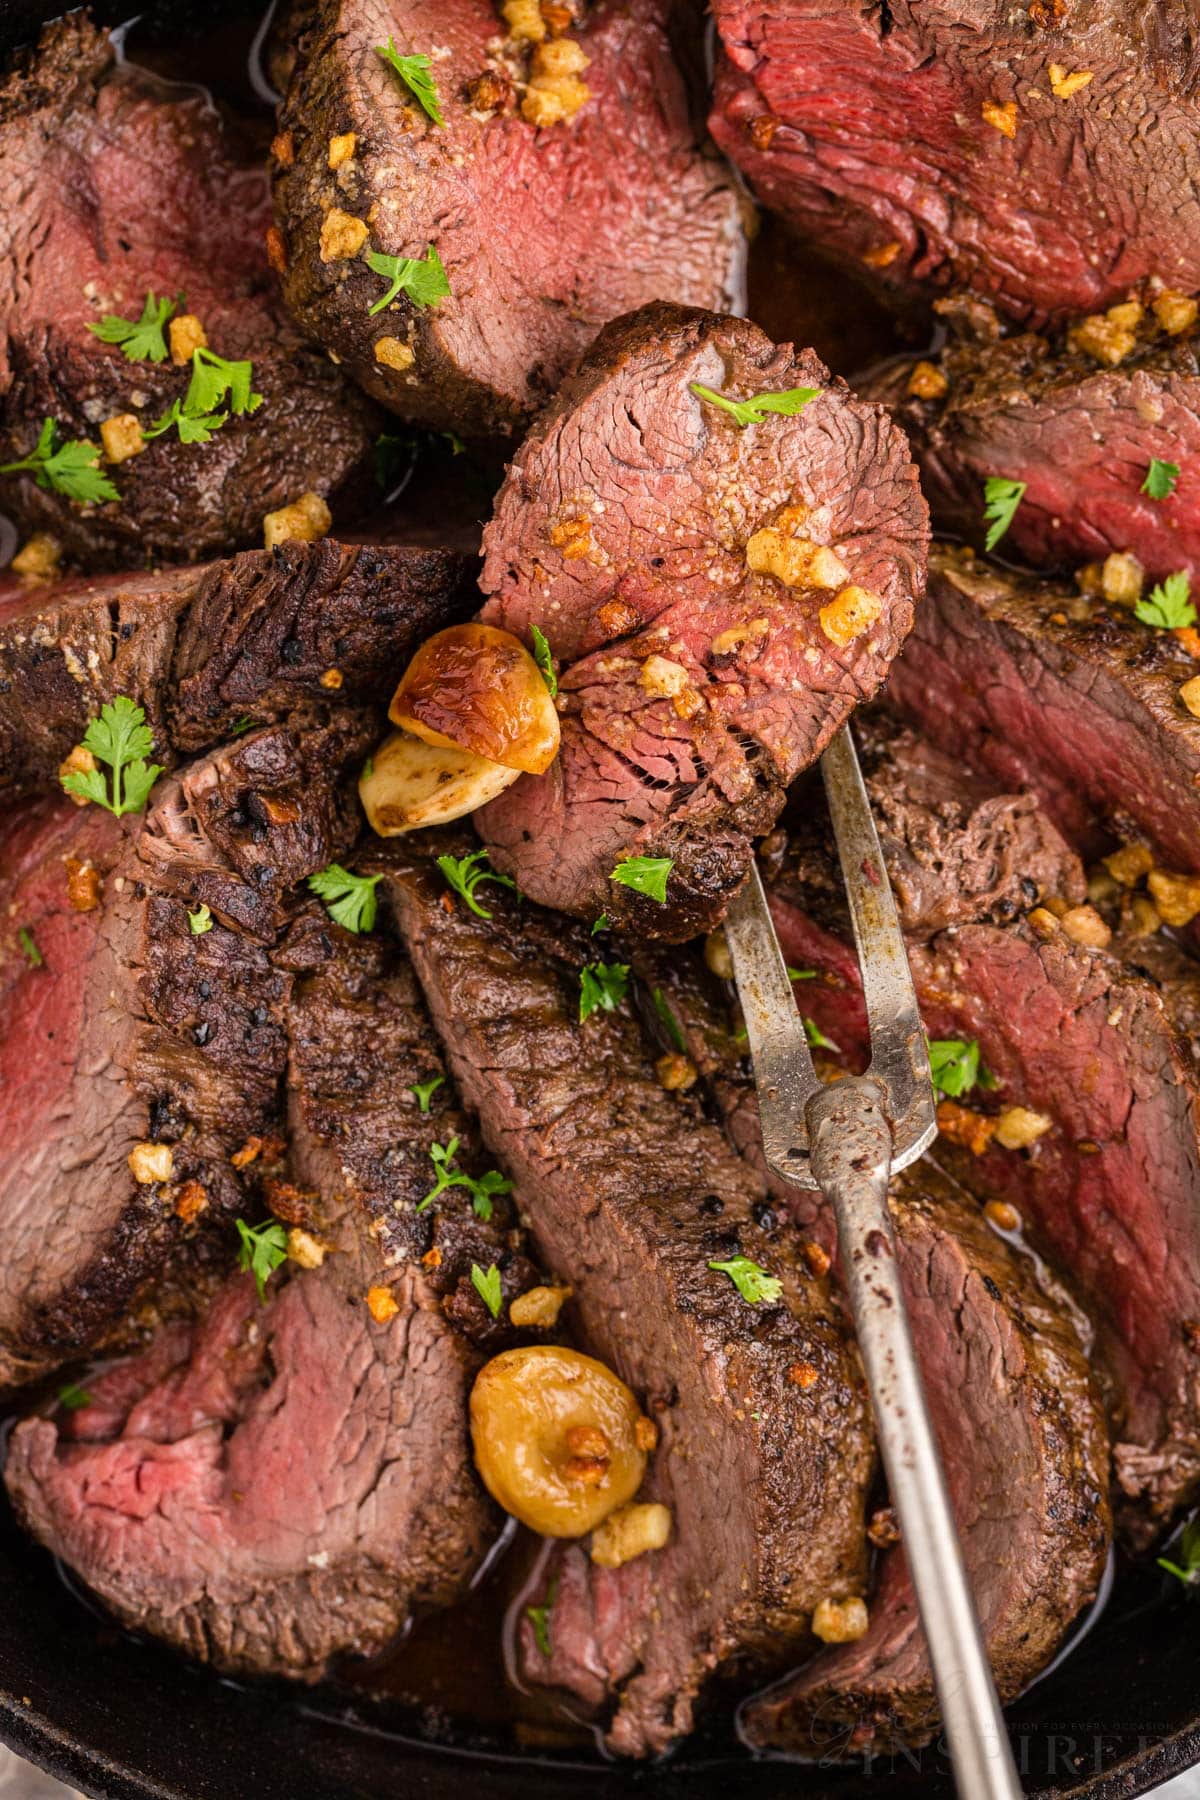 Close up of sliced roasted beef tenderloin in skillet with herb and roasted garlic garnish.